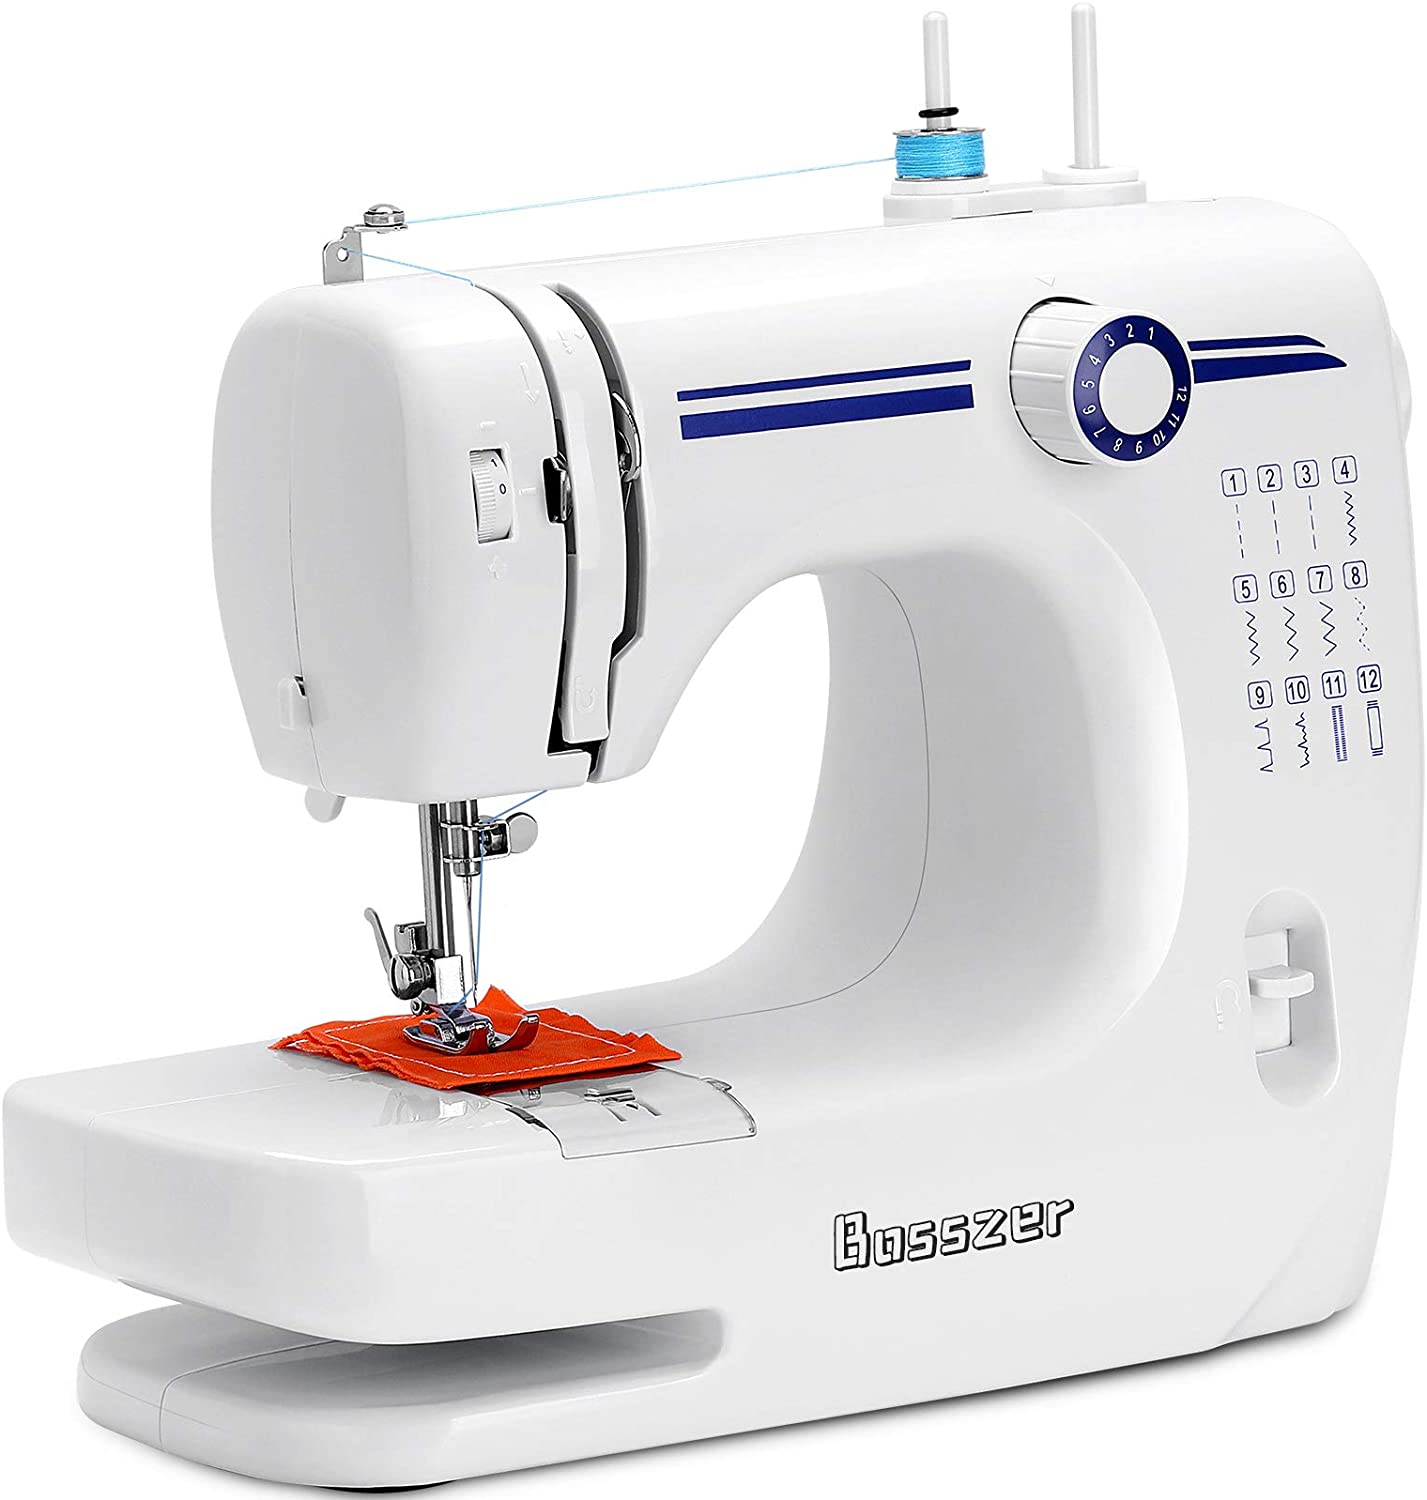 Bosszer Mini Sewing Machine for Beginners and Kids